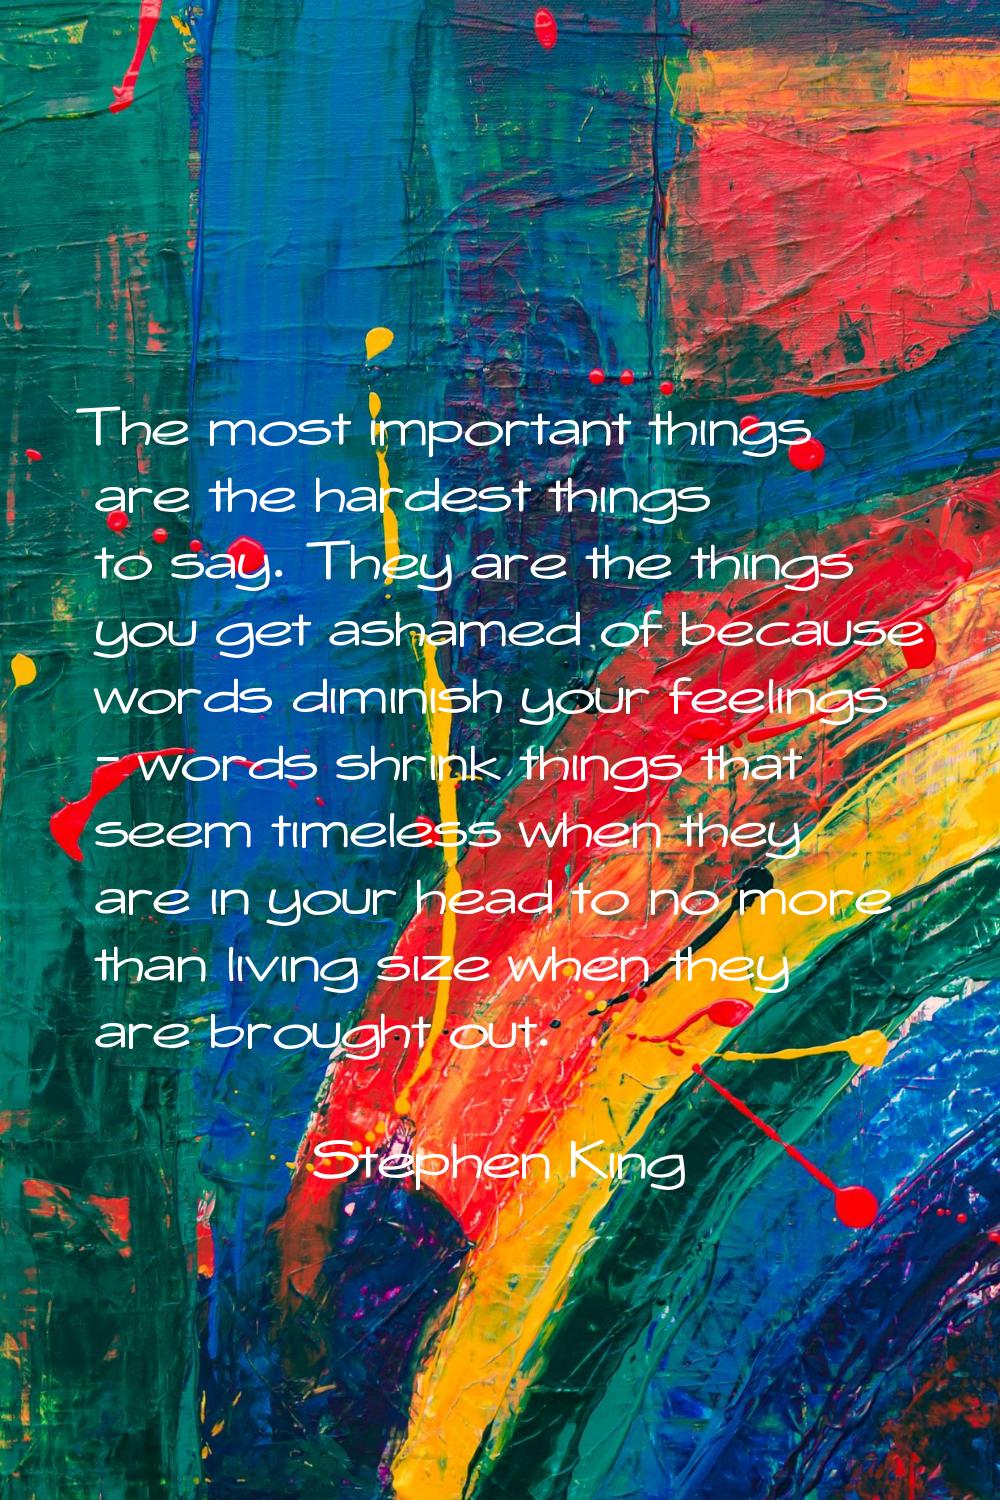 The most important things are the hardest things to say. They are the things you get ashamed of bec